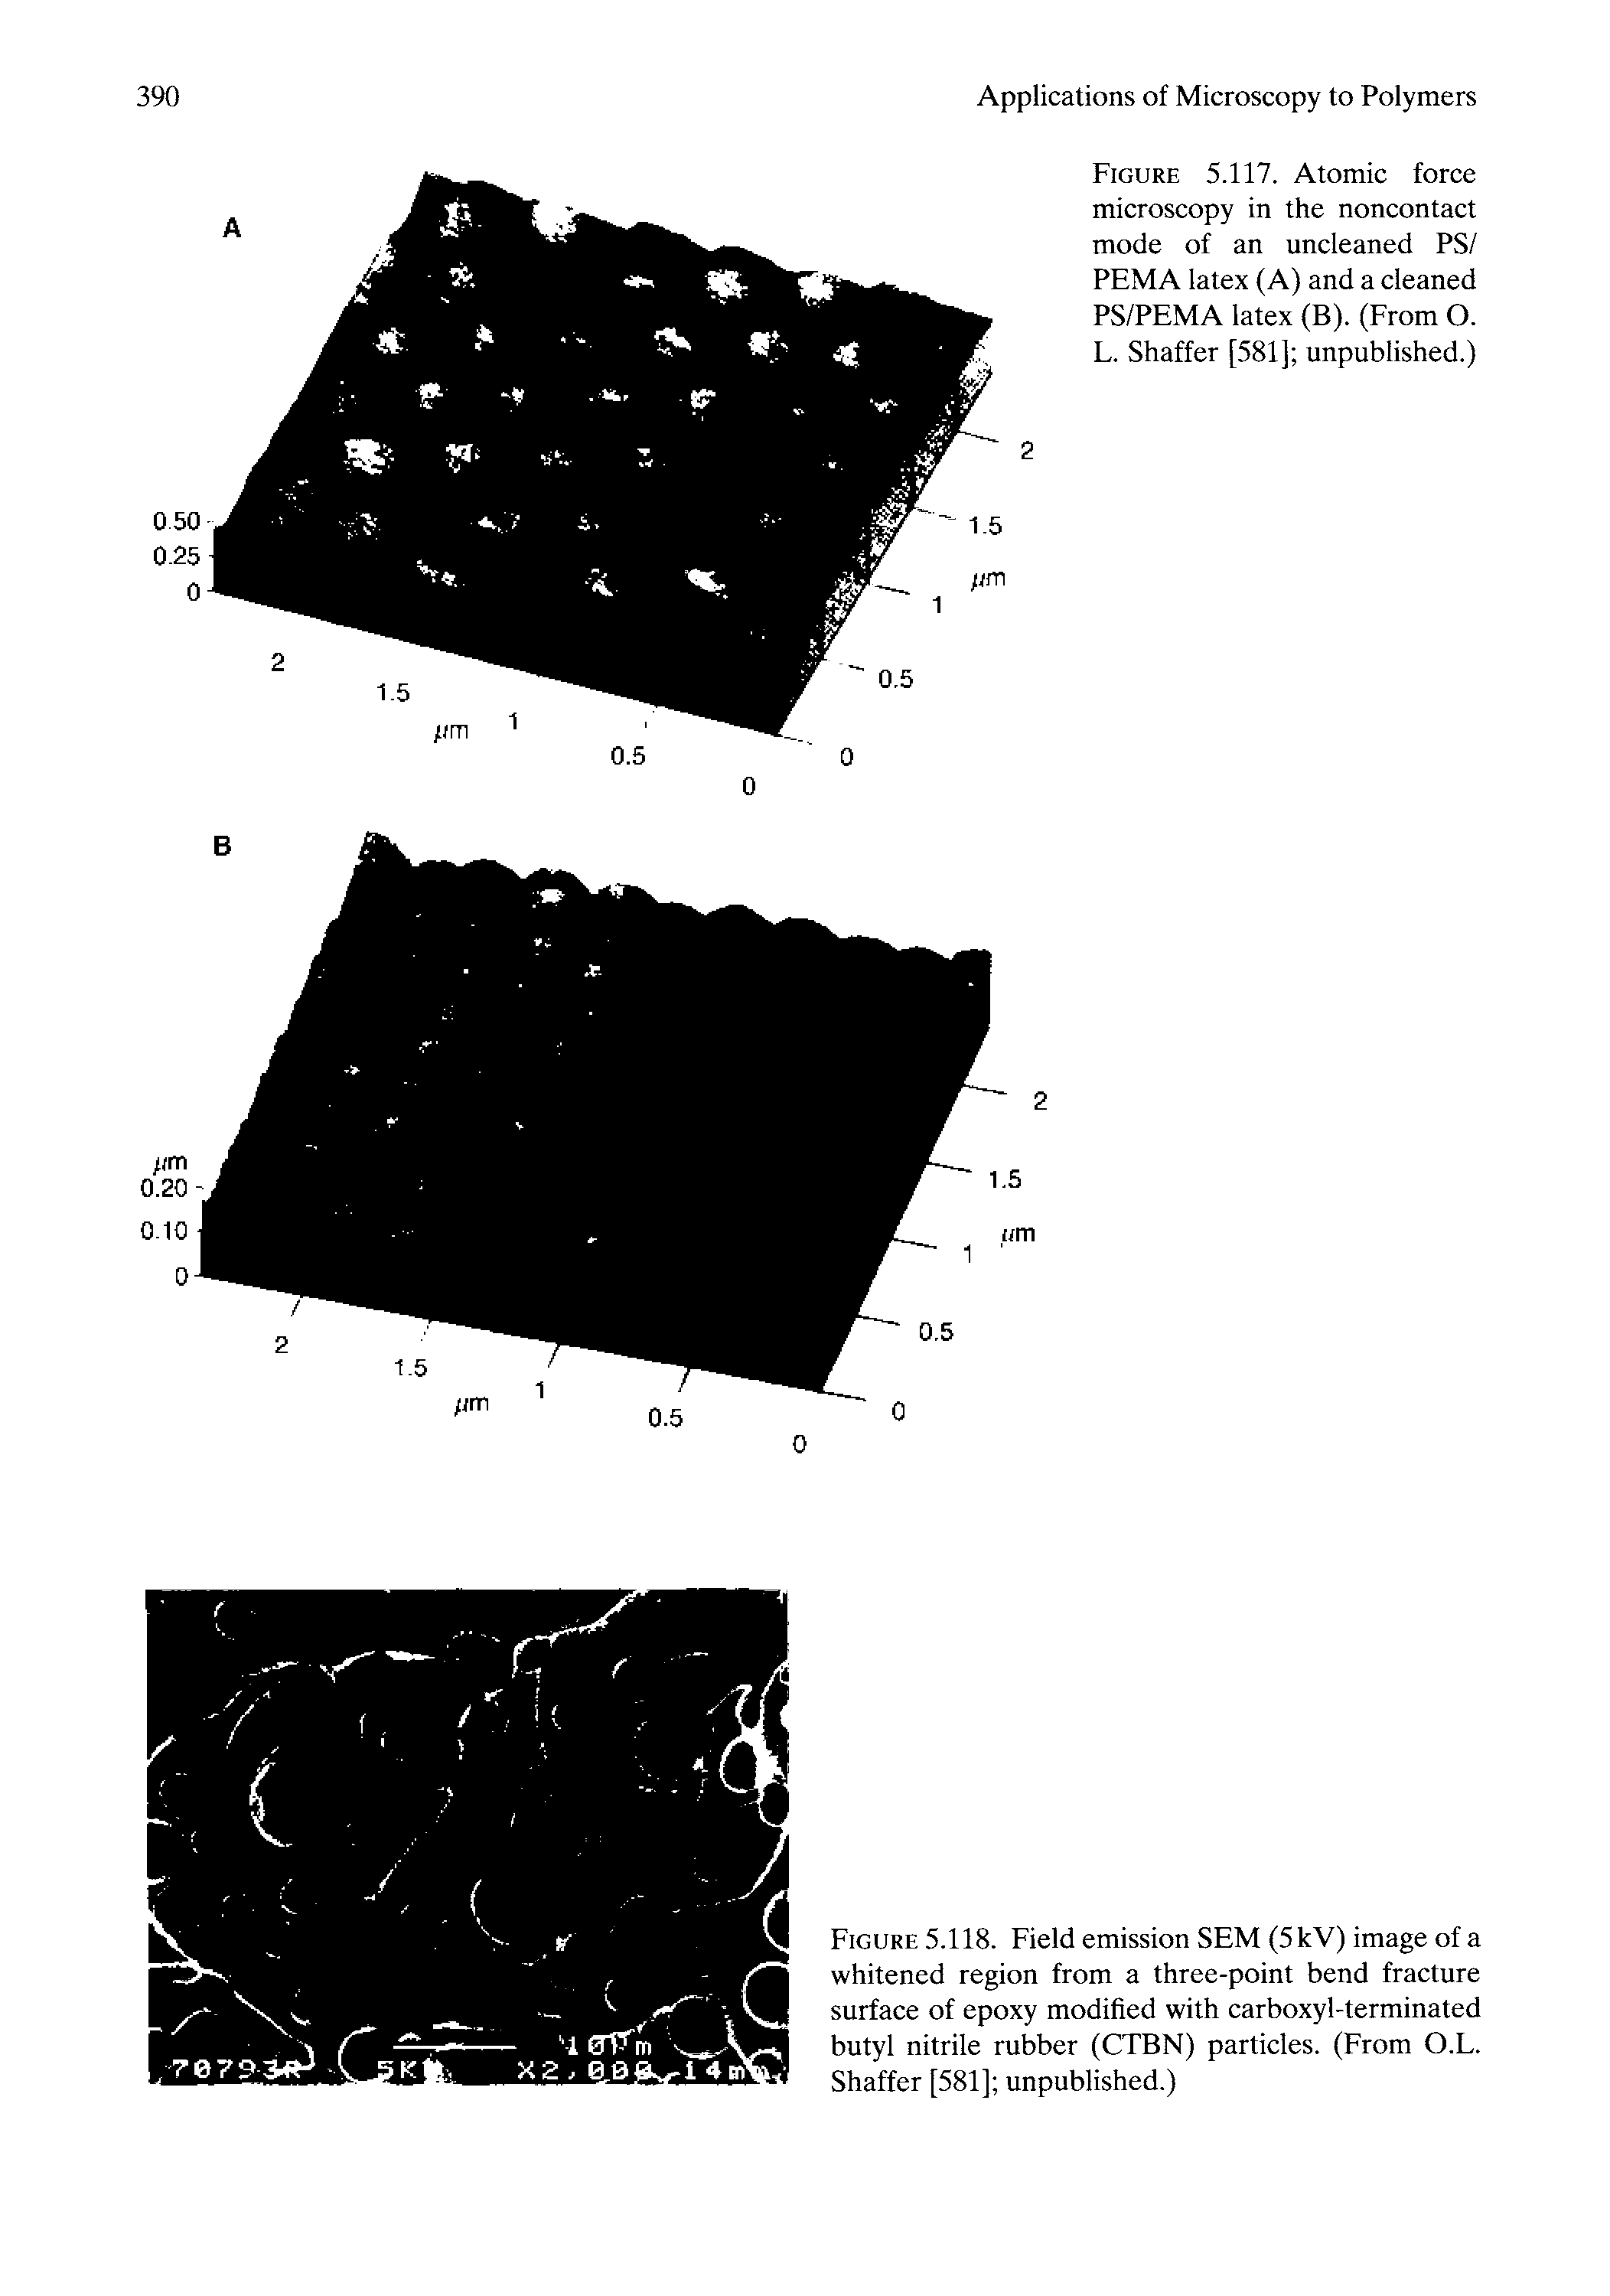 Figure 5.117. Atomic force microscopy in the noncontact mode of an uncleaned PS/ PEMA latex (A) and a cleaned PS/PEMA latex (B). (From O. L. Shaffer [581] unpublished.)...